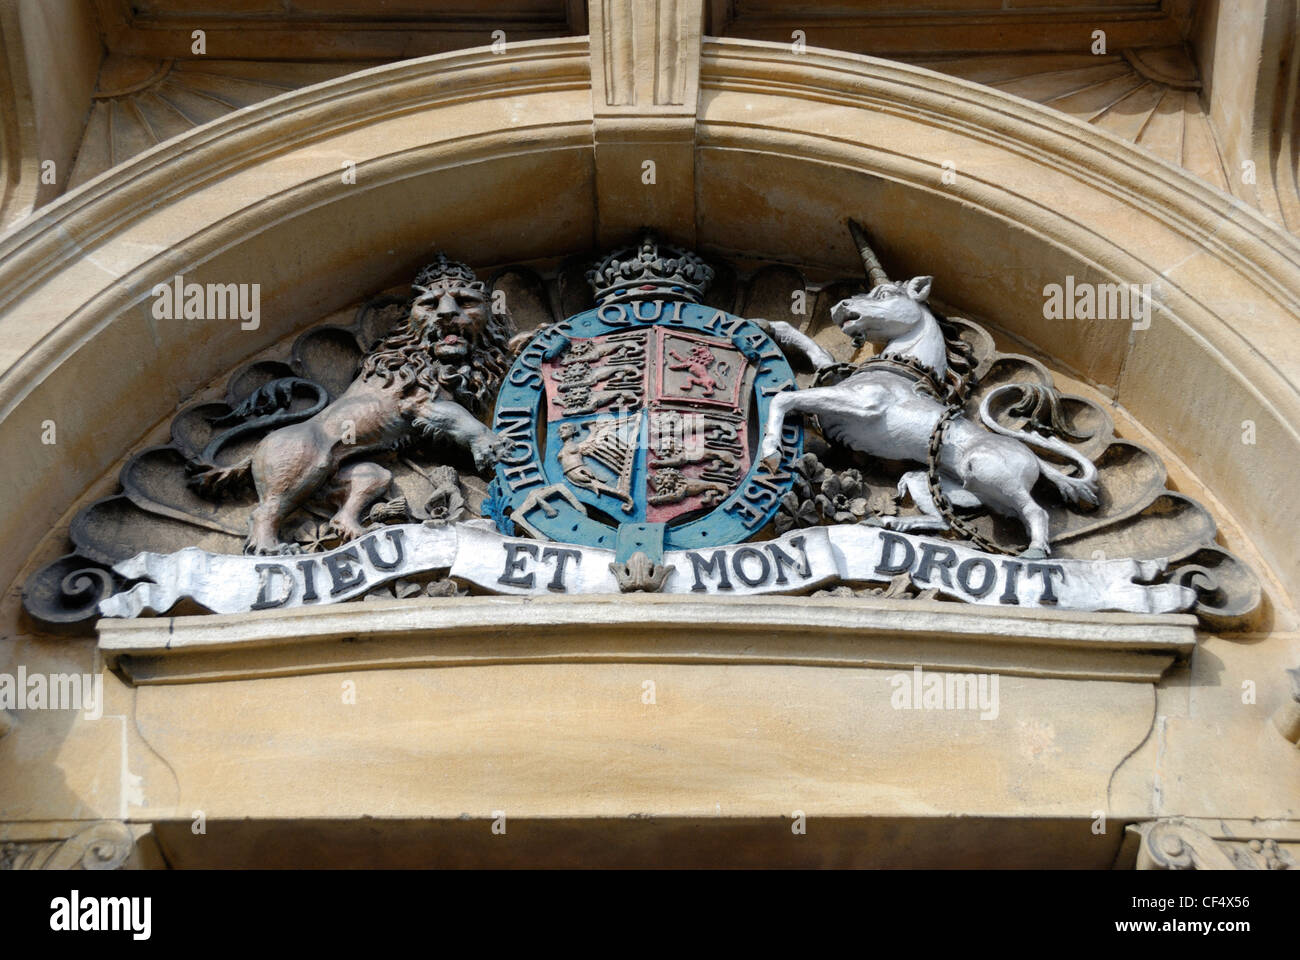 'Dieu et Mon Droit' motto and crest of the British Monarch on the exterior of a building. Stock Photo